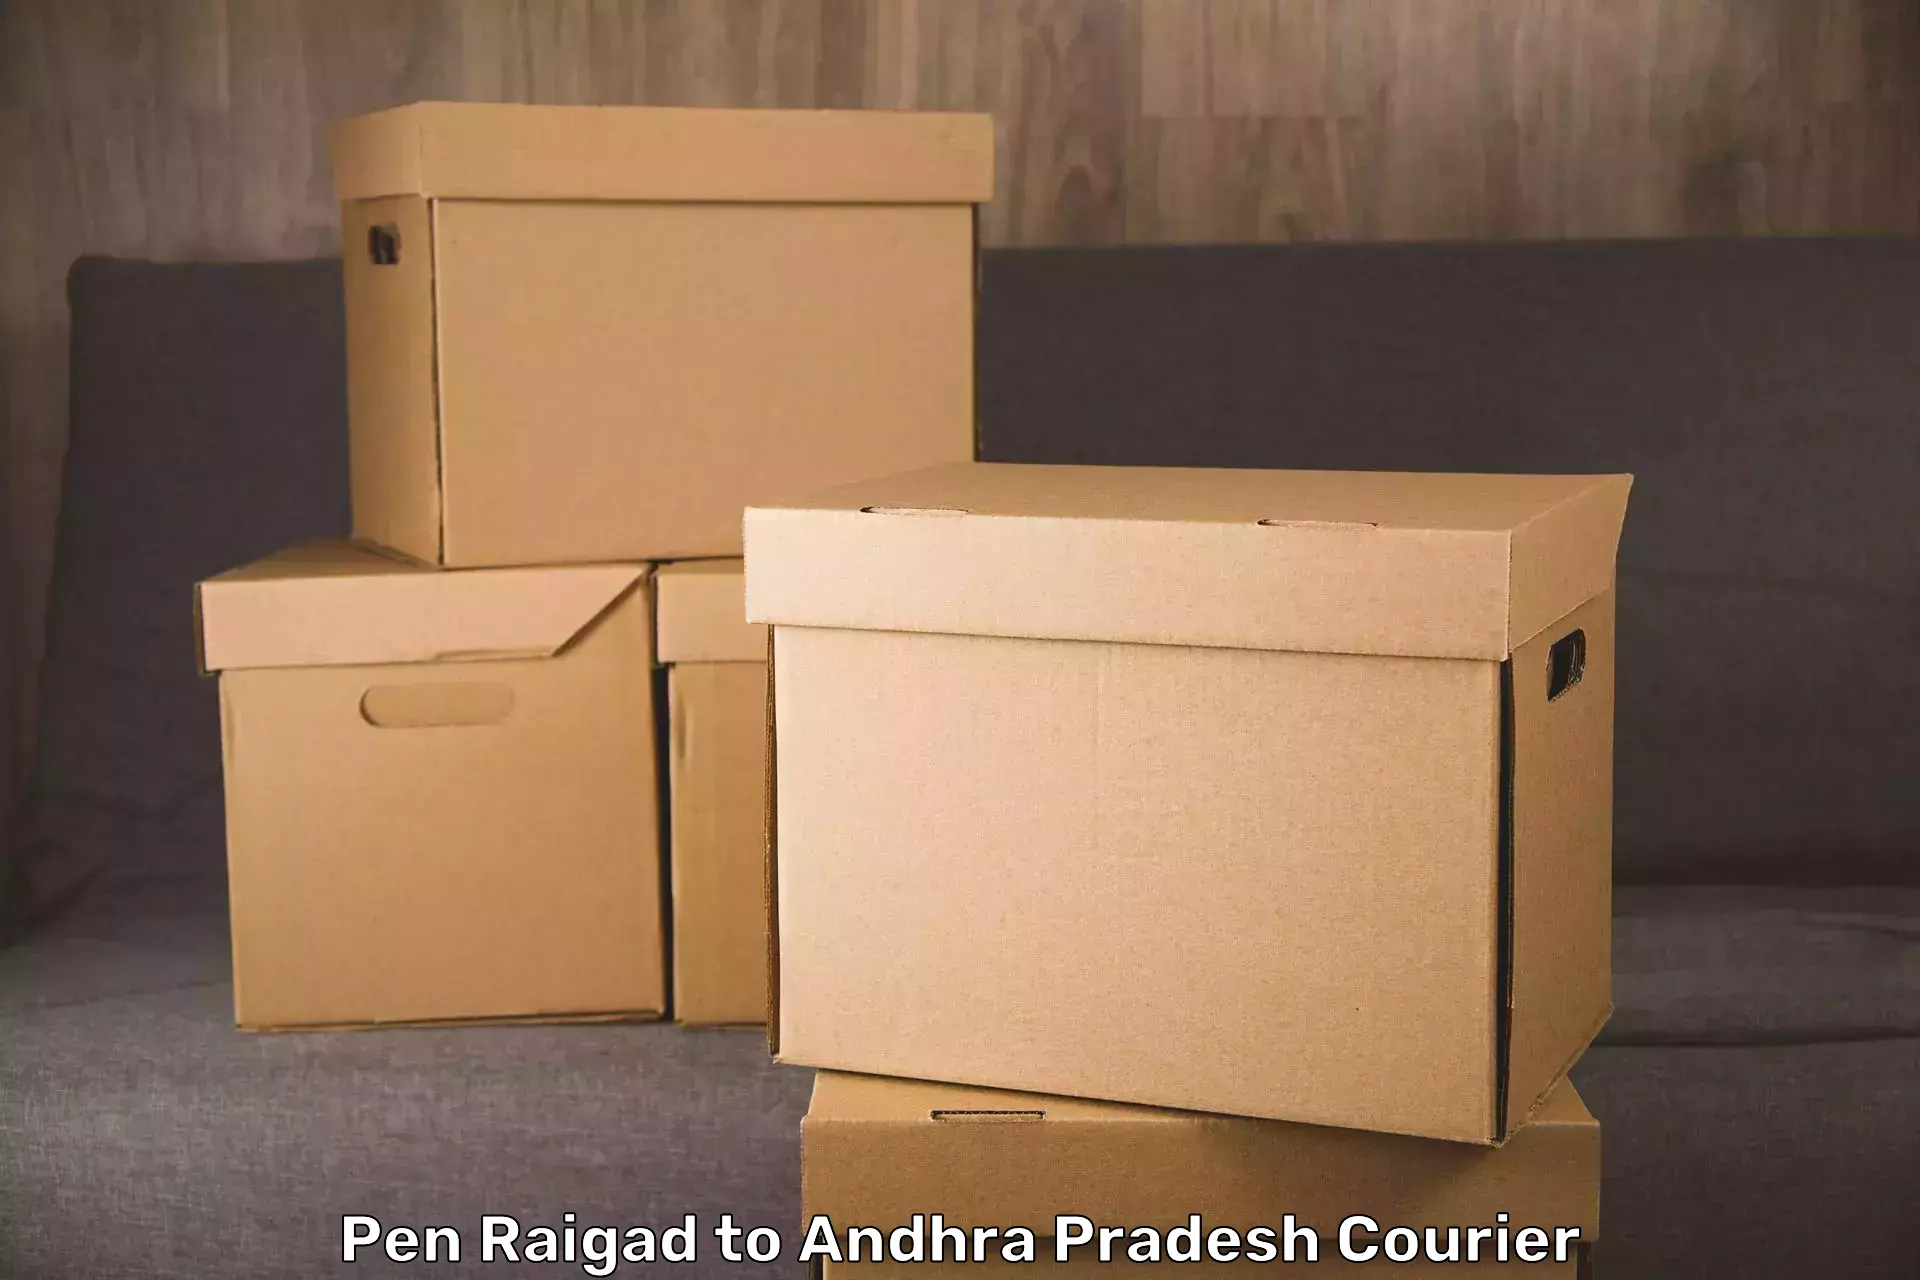 Baggage delivery support Pen Raigad to Visakhapatnam Port